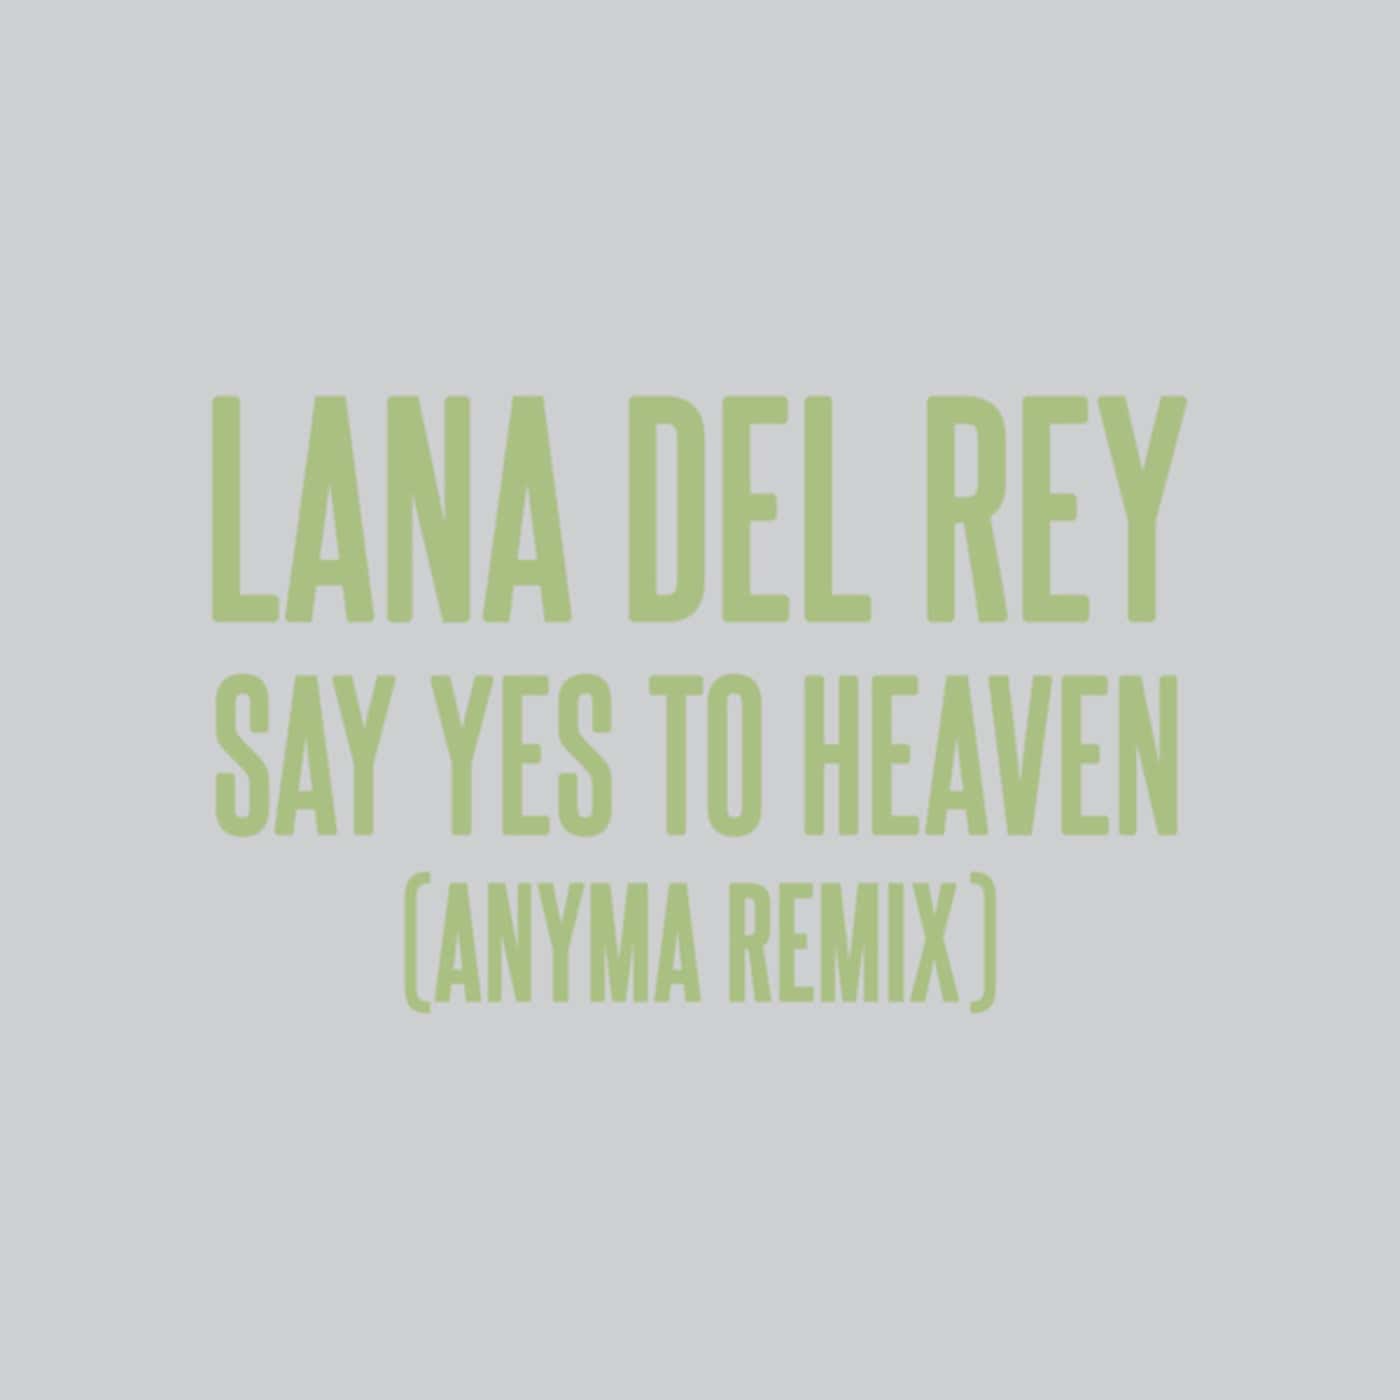 Release Cover: Lana Del Rey, Anyma (ofc) - Say Yes To Heaven (Anyma Remix) on Electrobuzz